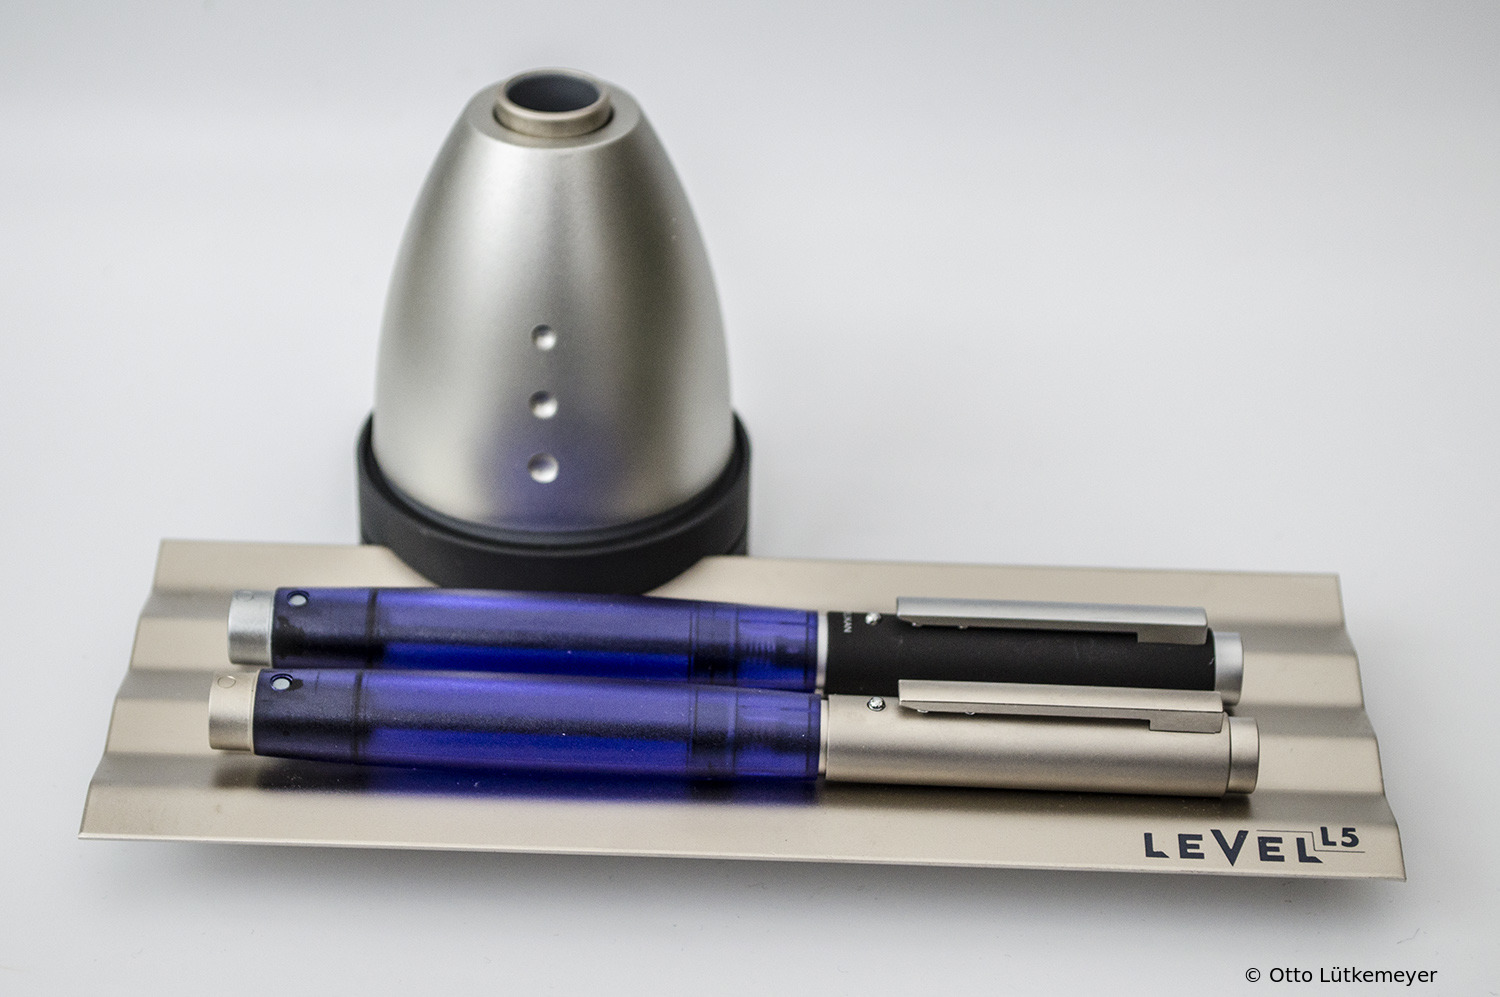 B or OB-nib Details about   Pelikan LEVEL L5 Piston Fountain Pen in Silver Blue with 14K M 